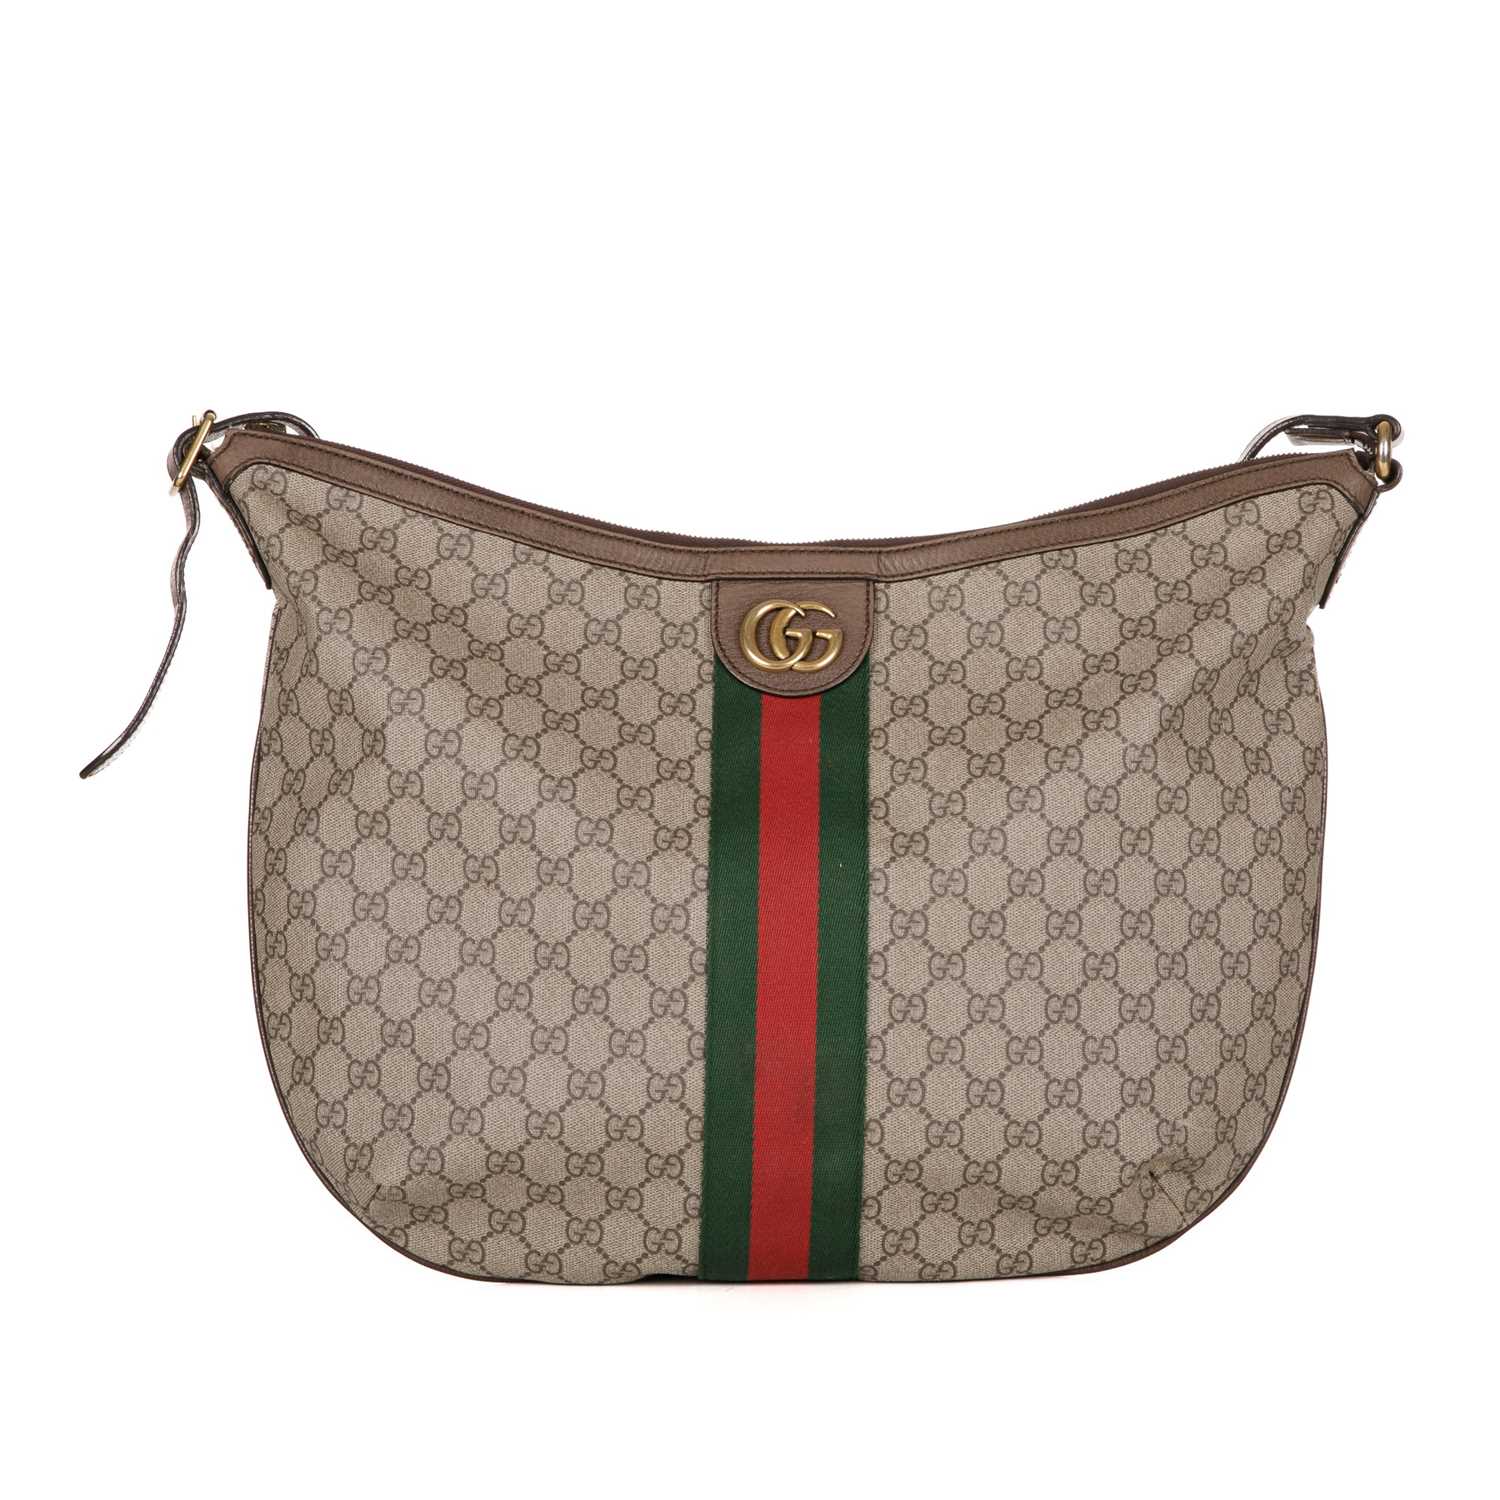 Gucci, a large Ophidia Web hobo handbag, crafted from the maker's supreme GG coated canvas, with